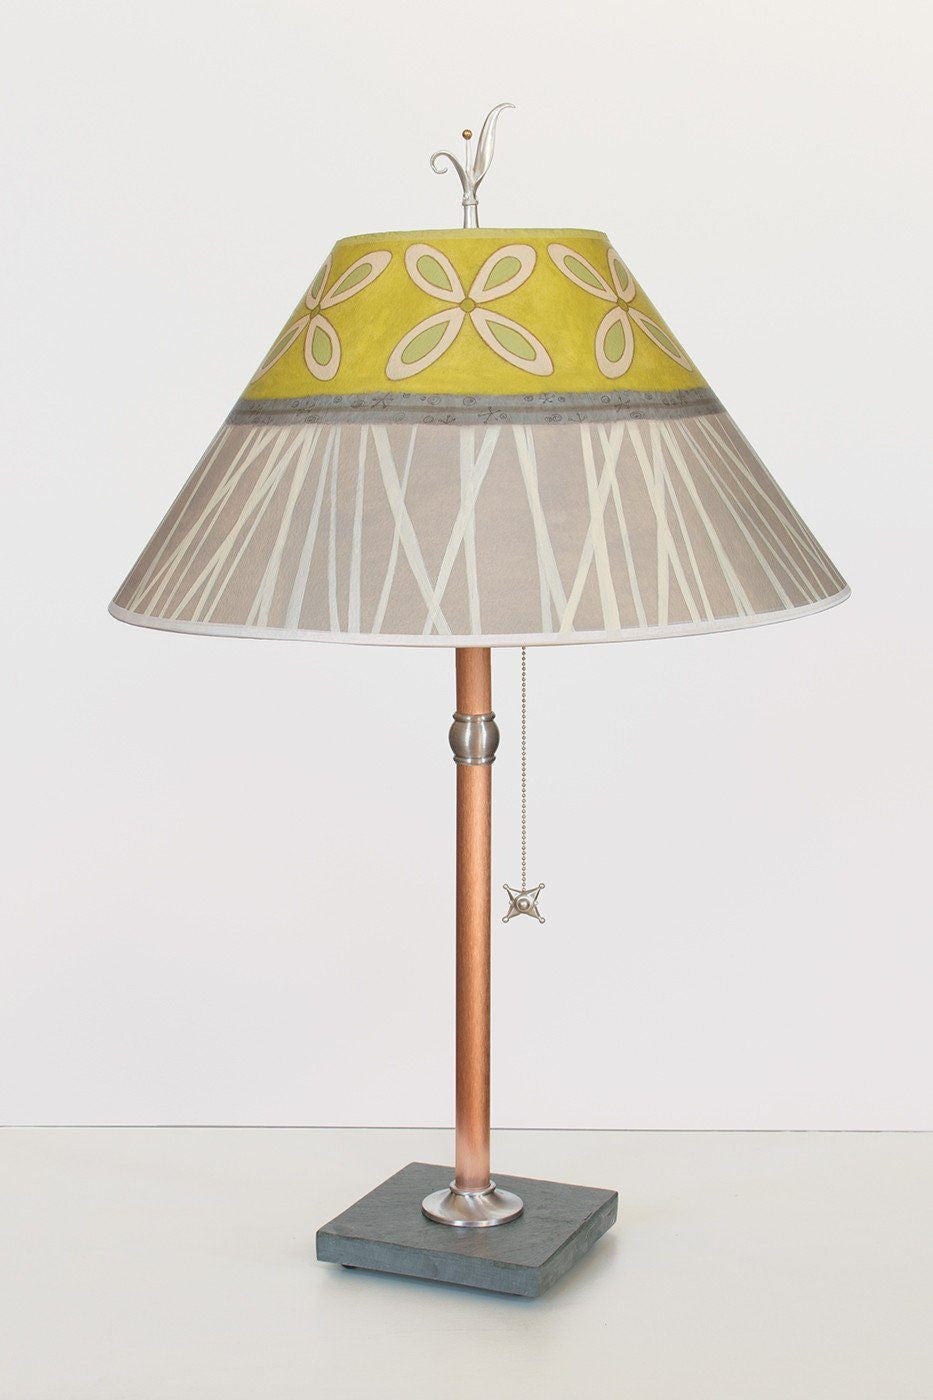 Janna Ugone &amp; Co Table Lamps Copper Table Lamp with Large Conical Shade in Kiwi